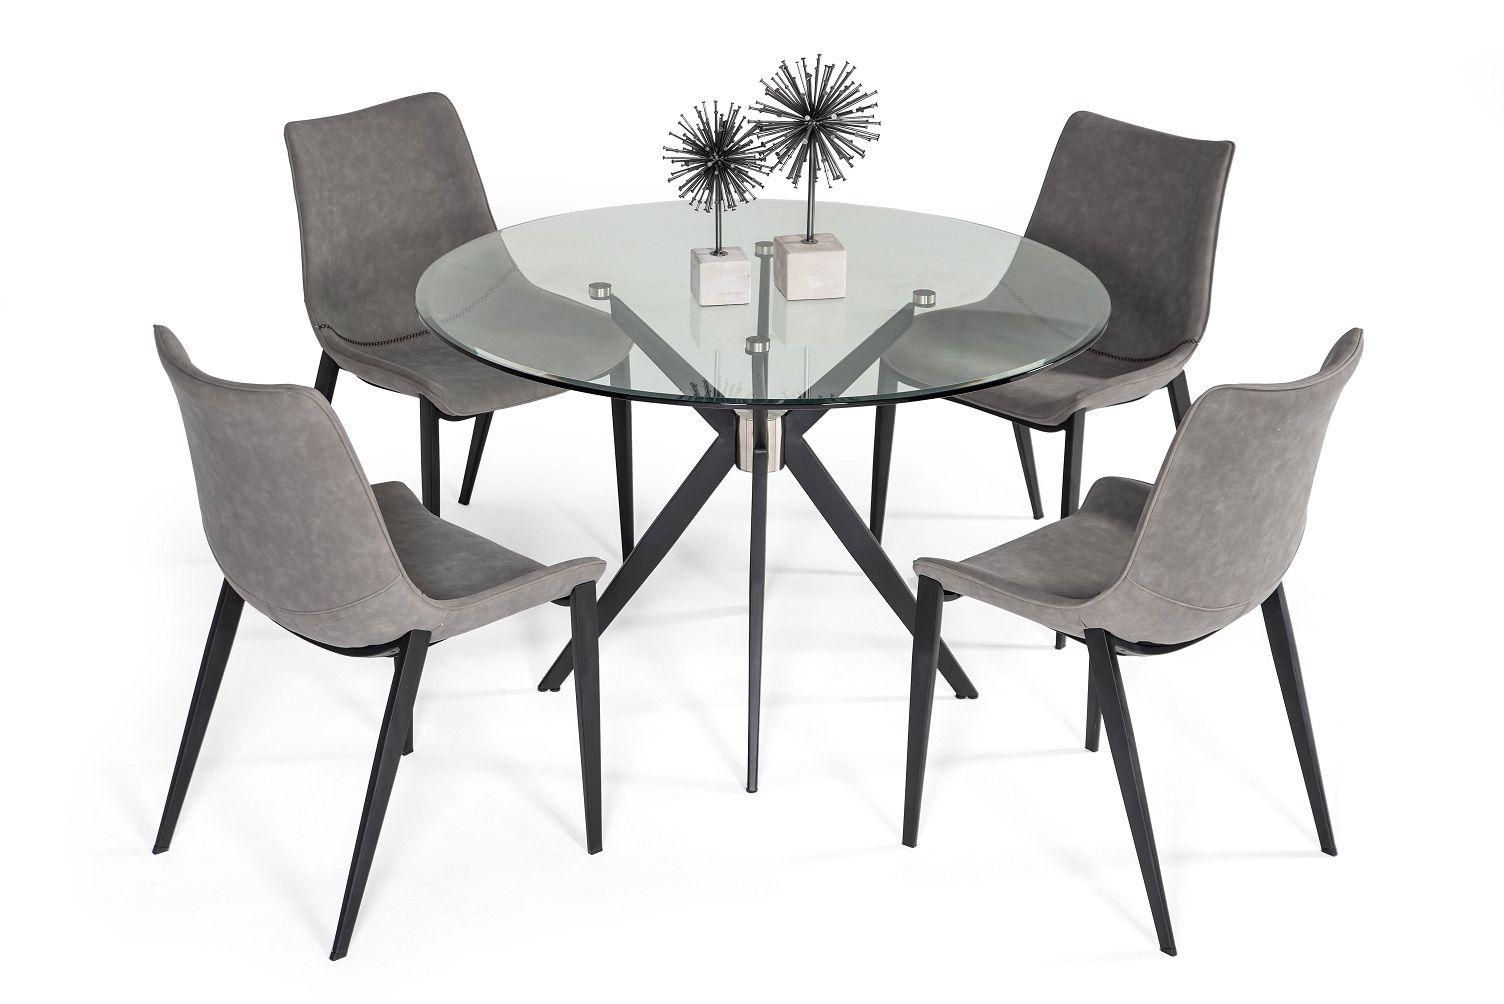 Contemporary, Modern Dining Room Set Dallas Frasier VGHR7038-BLK-5pcs in Black Eco-Leather